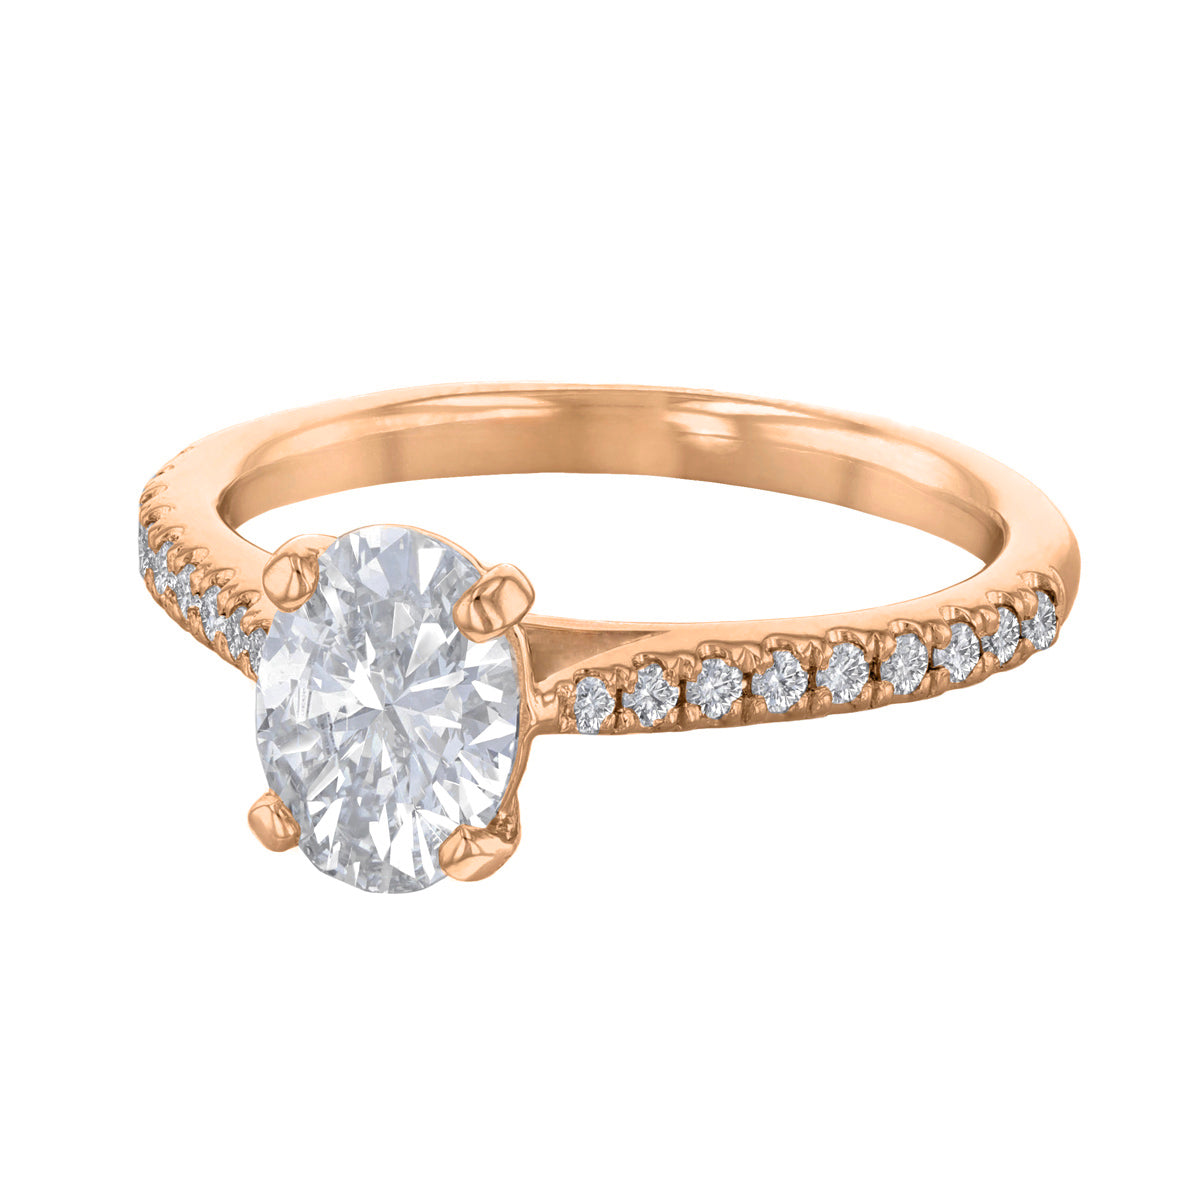 1-00ct-ophelia-shoulder-set-oval-cut-solitaire-diamond-engagement-ring-18ct-rose-gold